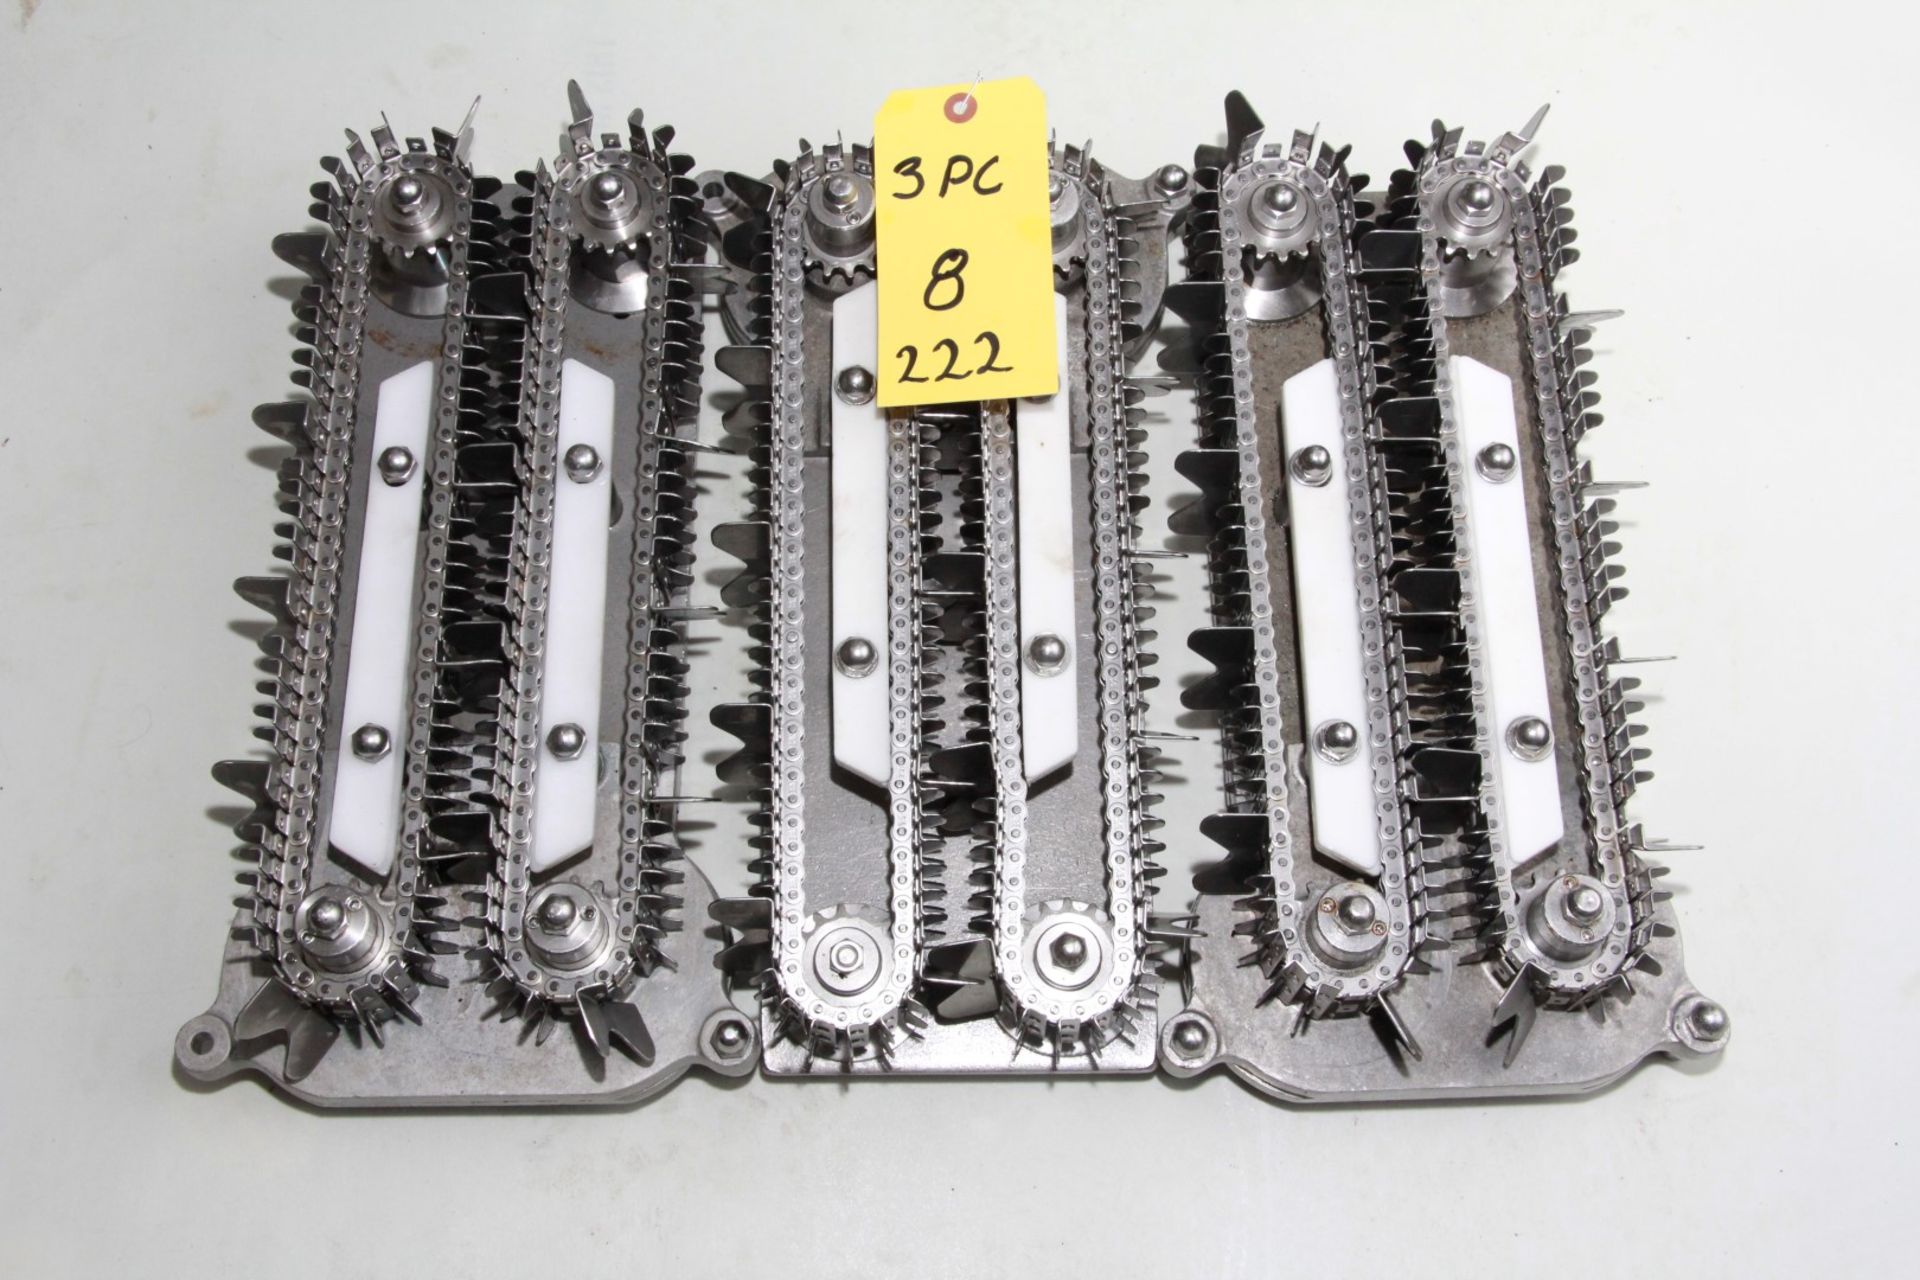 TOWNSEND NL #8 CHAIN ASSEMBLY. 3 PCS.